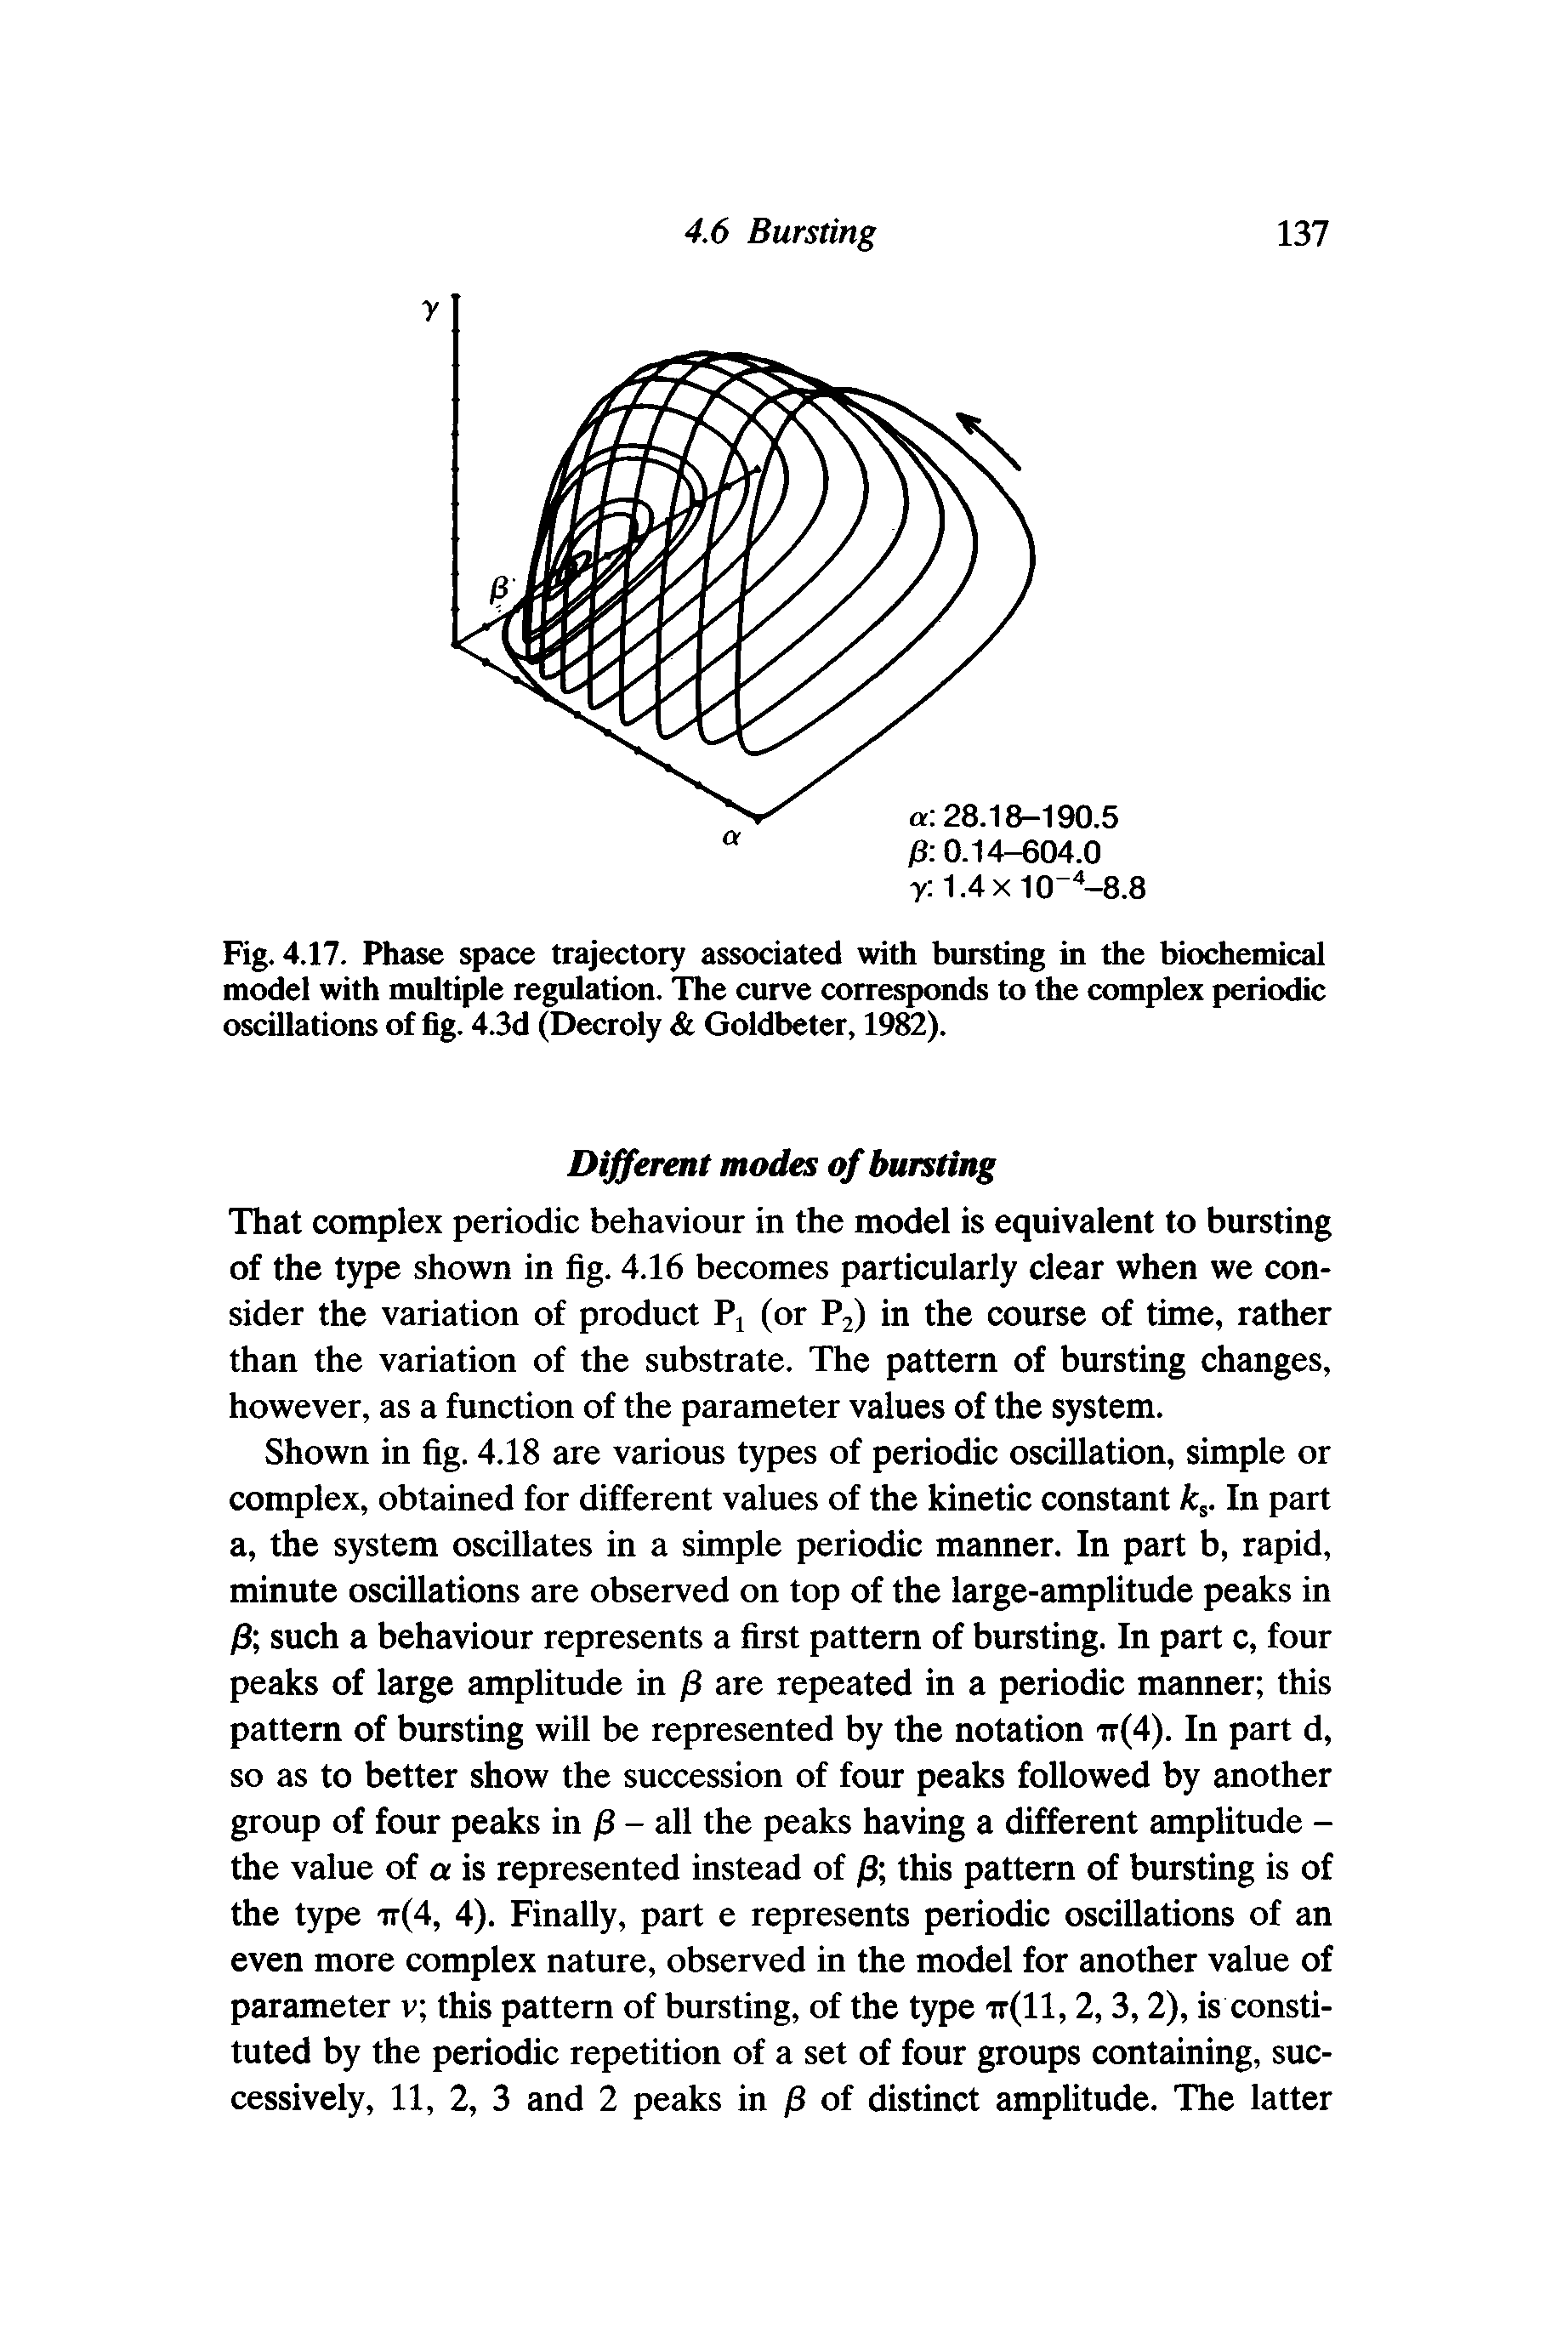 Fig. 4.17. Phase space trajectory associated with bursting in the biochemical model with multiple regulation. The curve corresponds to the complex periodic oscillations of fig. 4.3d (Decroly Goldbeter, 1982).